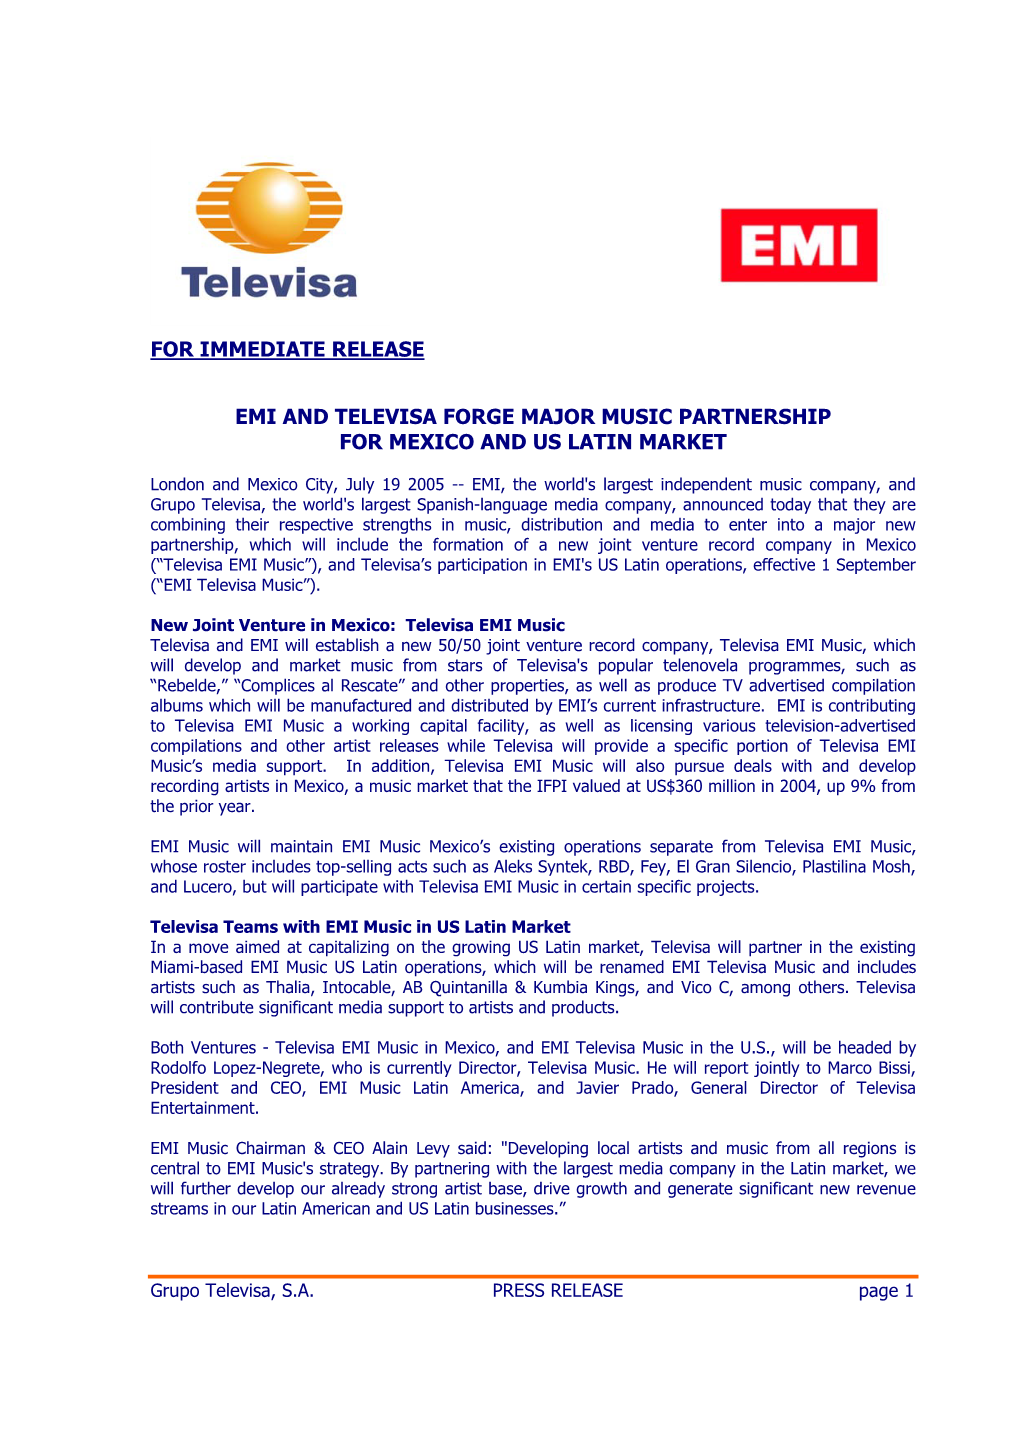 For Immediate Release Emi and Televisa Forge Major Music